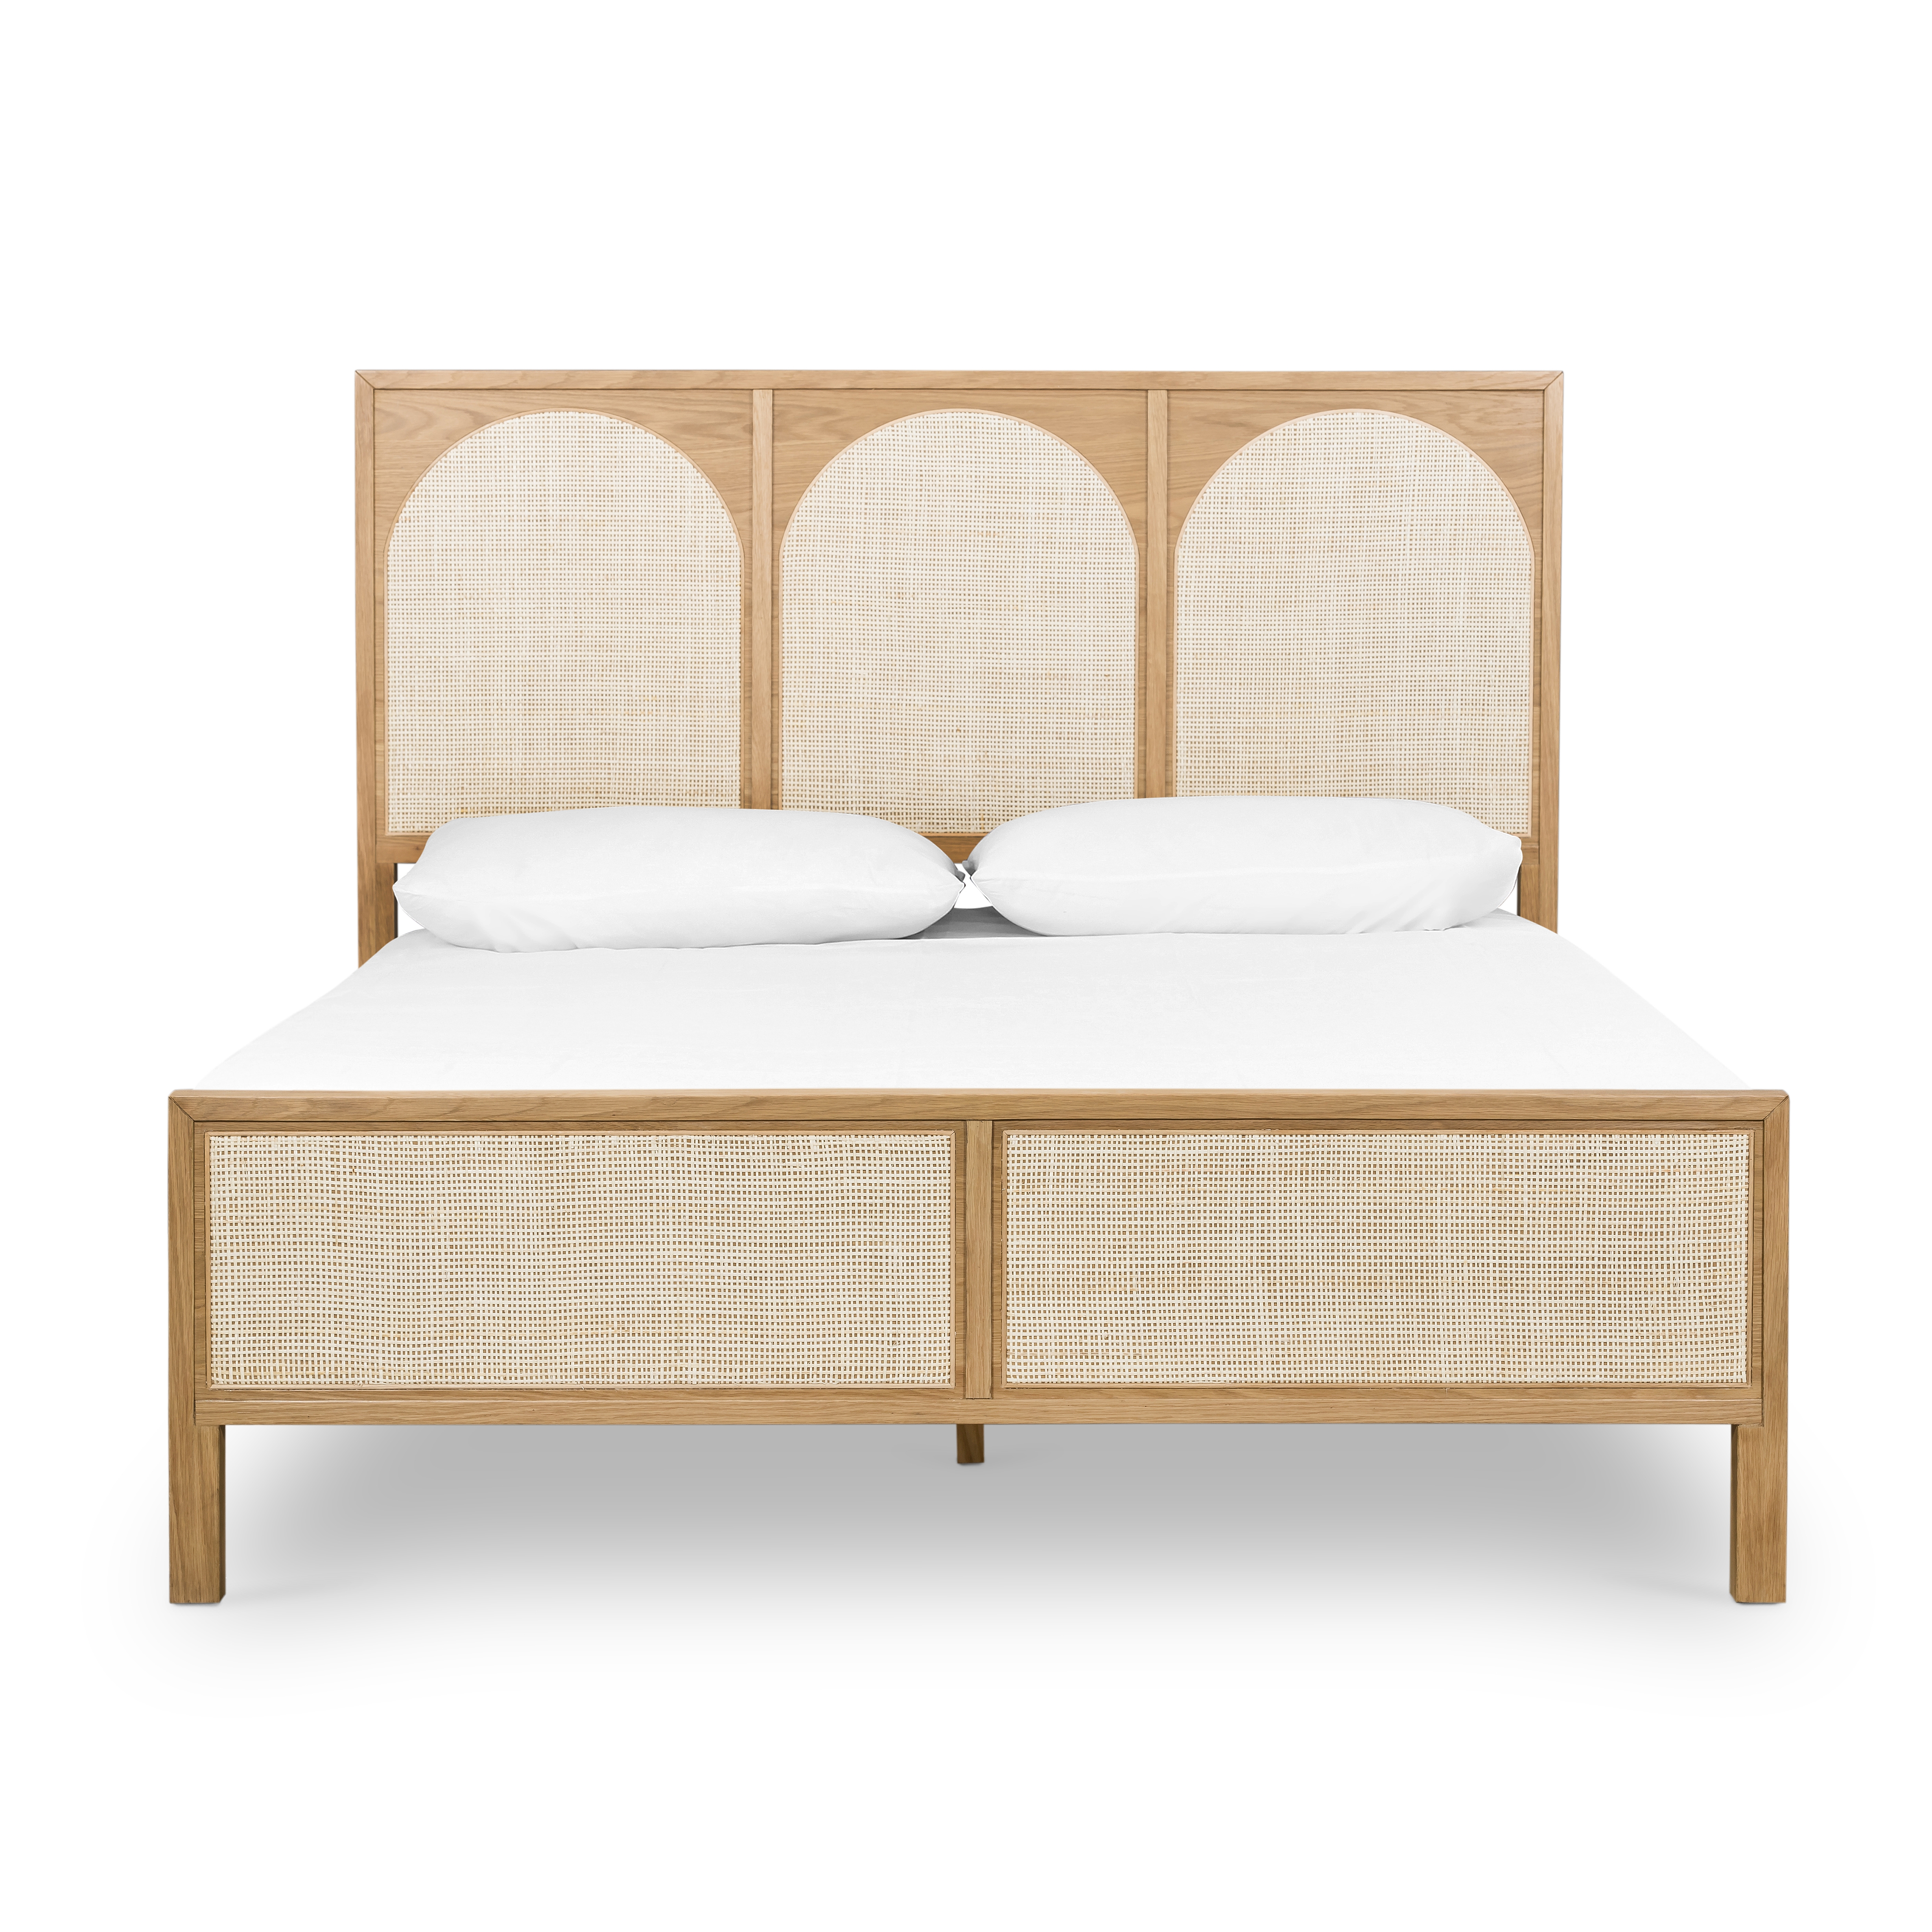 Allegra Bed-Natural Cane-Queen - Image 2